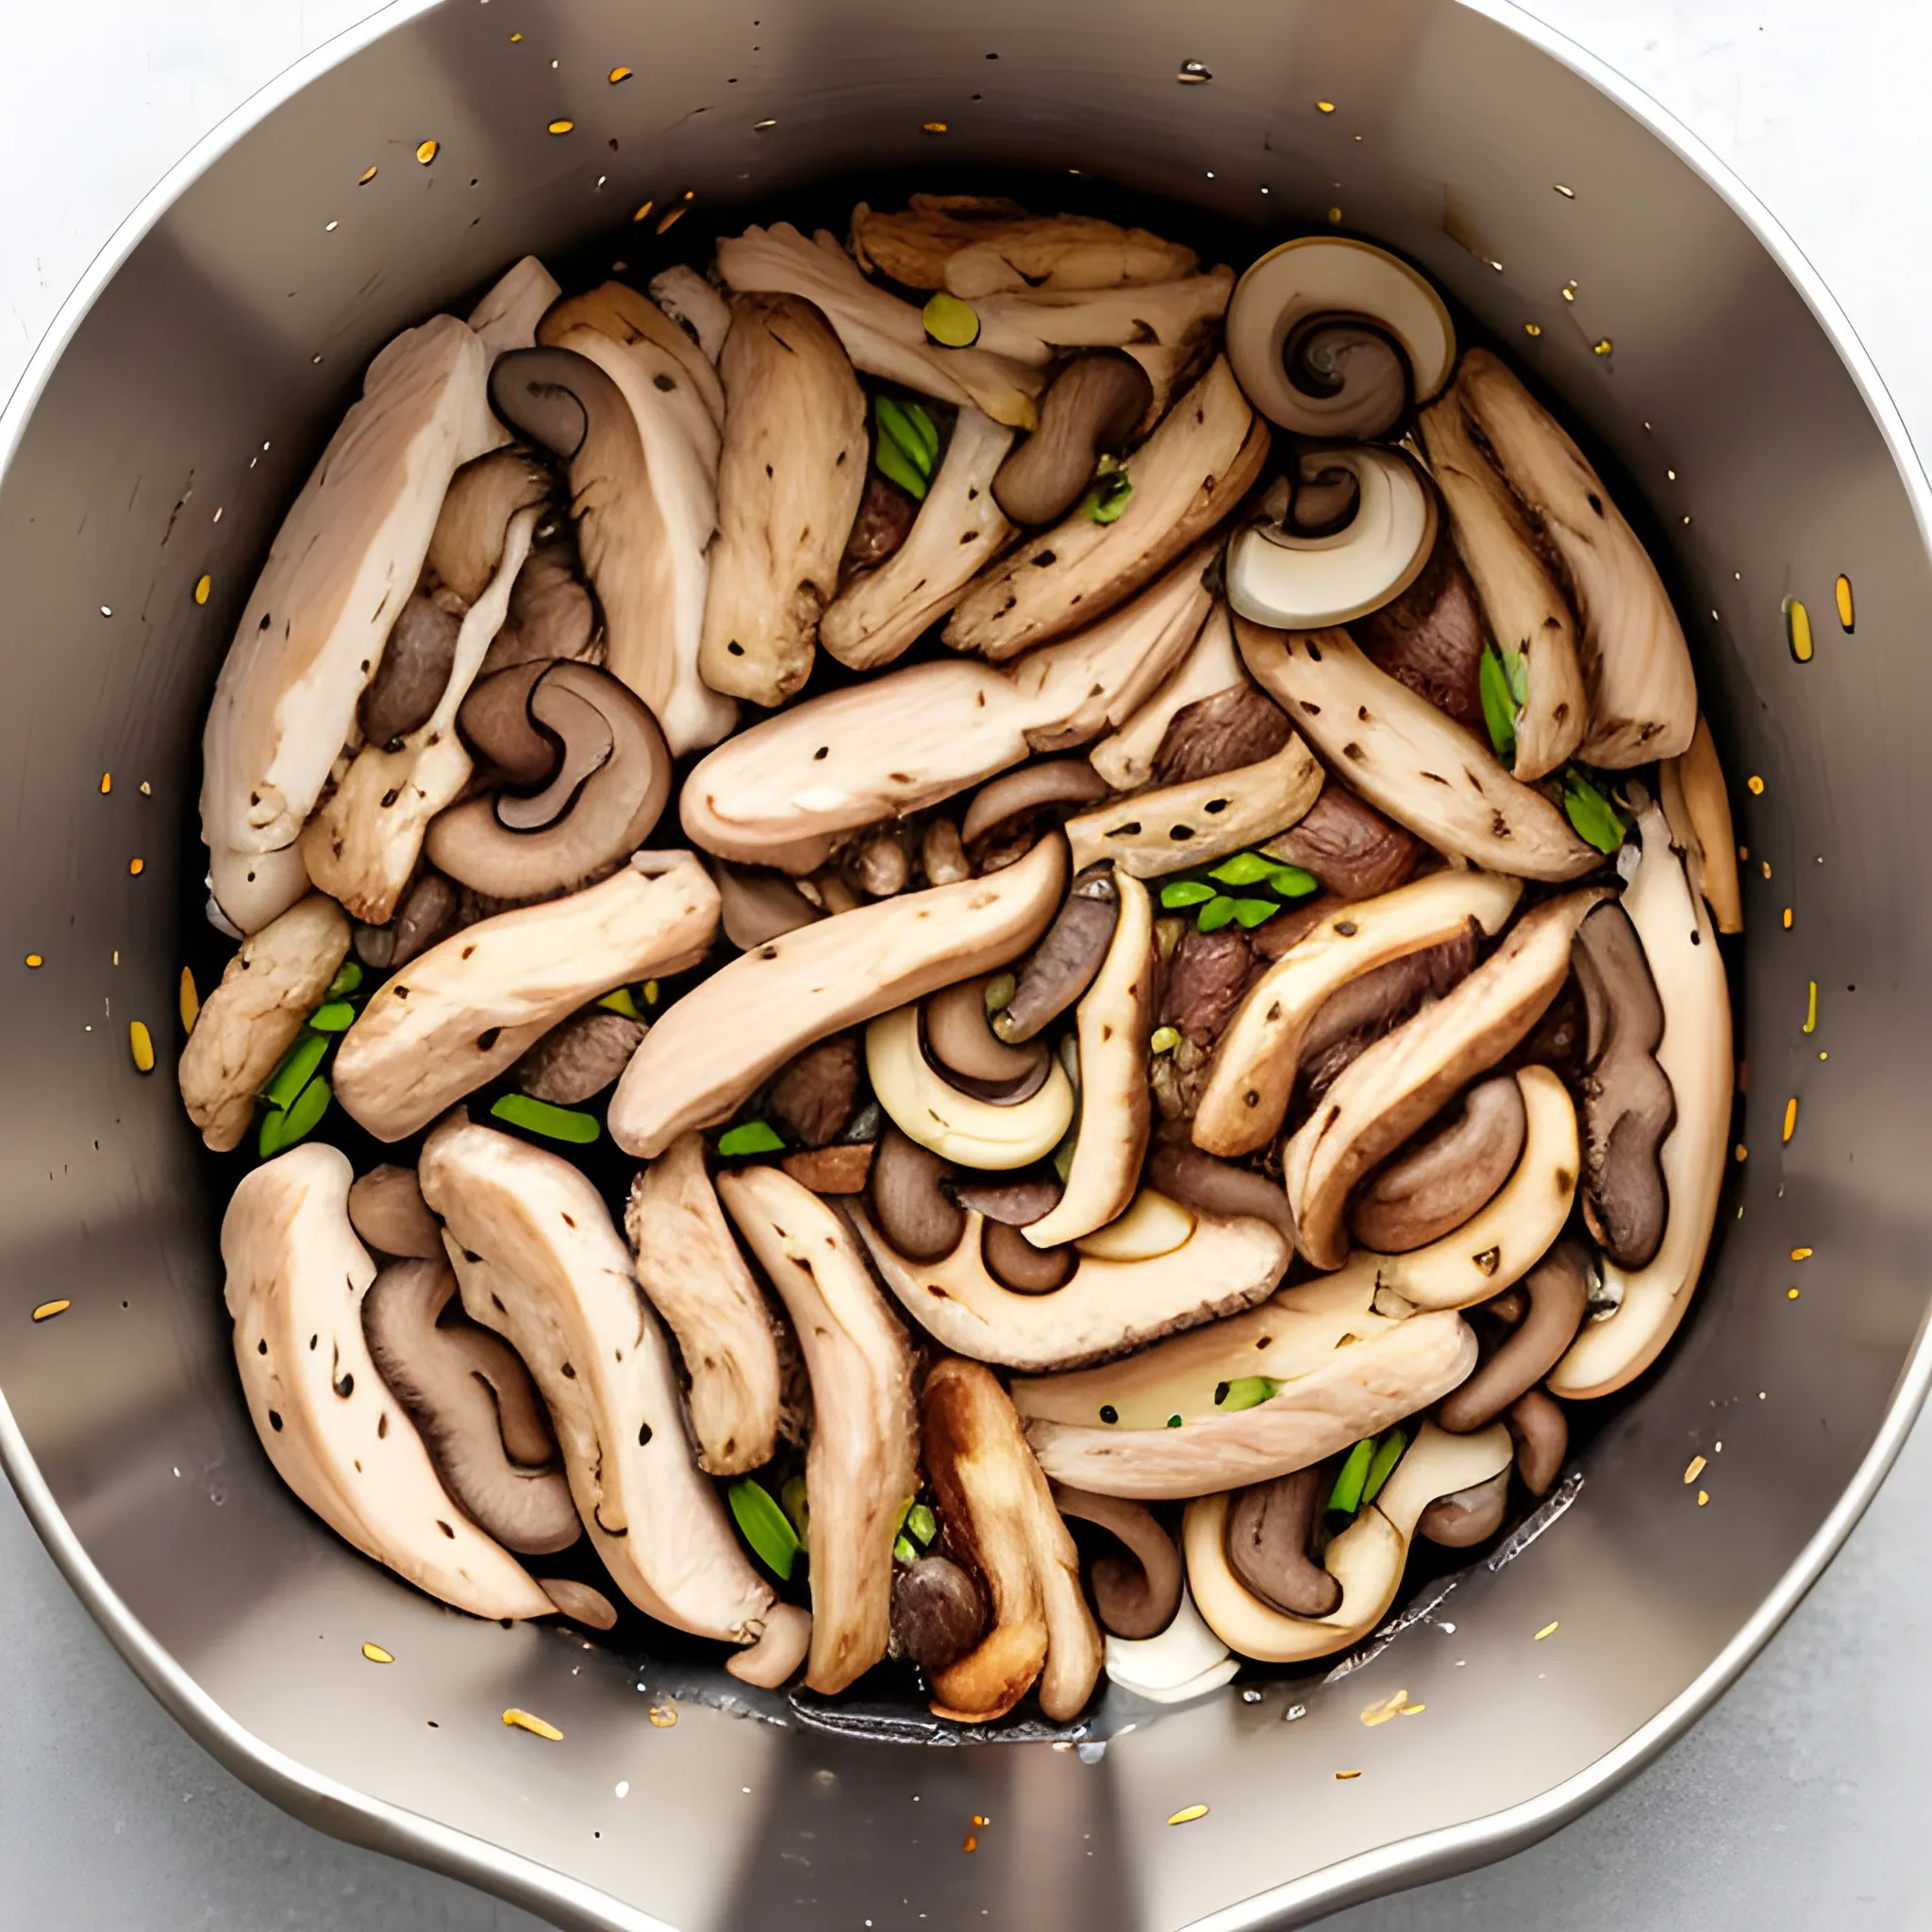 Put the sliced chicken pieces in the basin, and some shiitake mushrooms, set aside